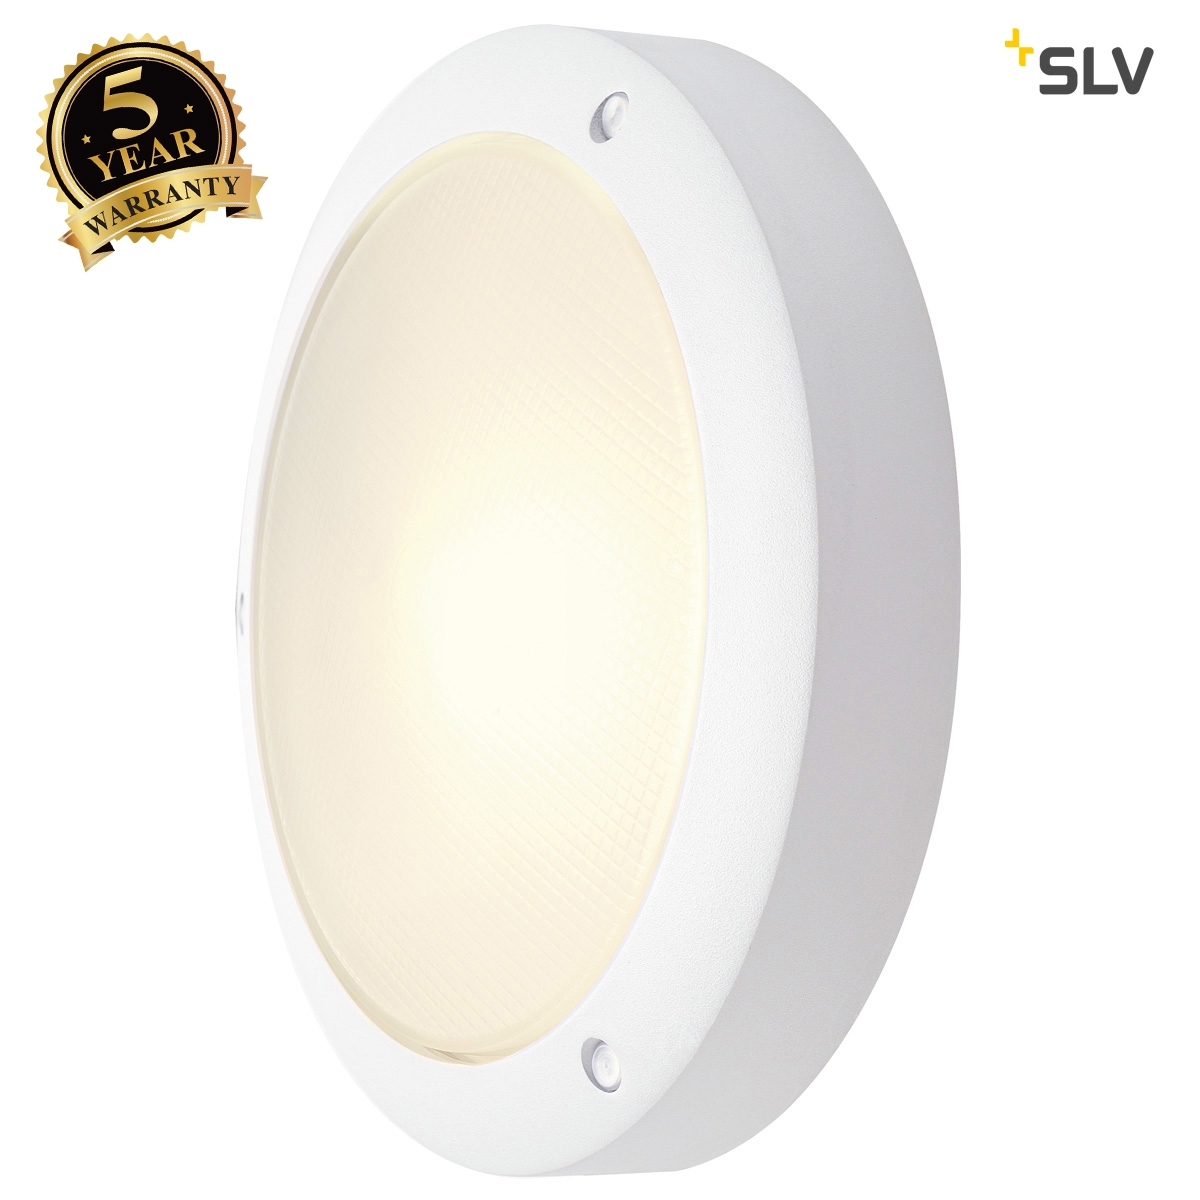 SLV BULAN wall and ceiling light, round, white, E14, max. 60W, frosted glass 229071